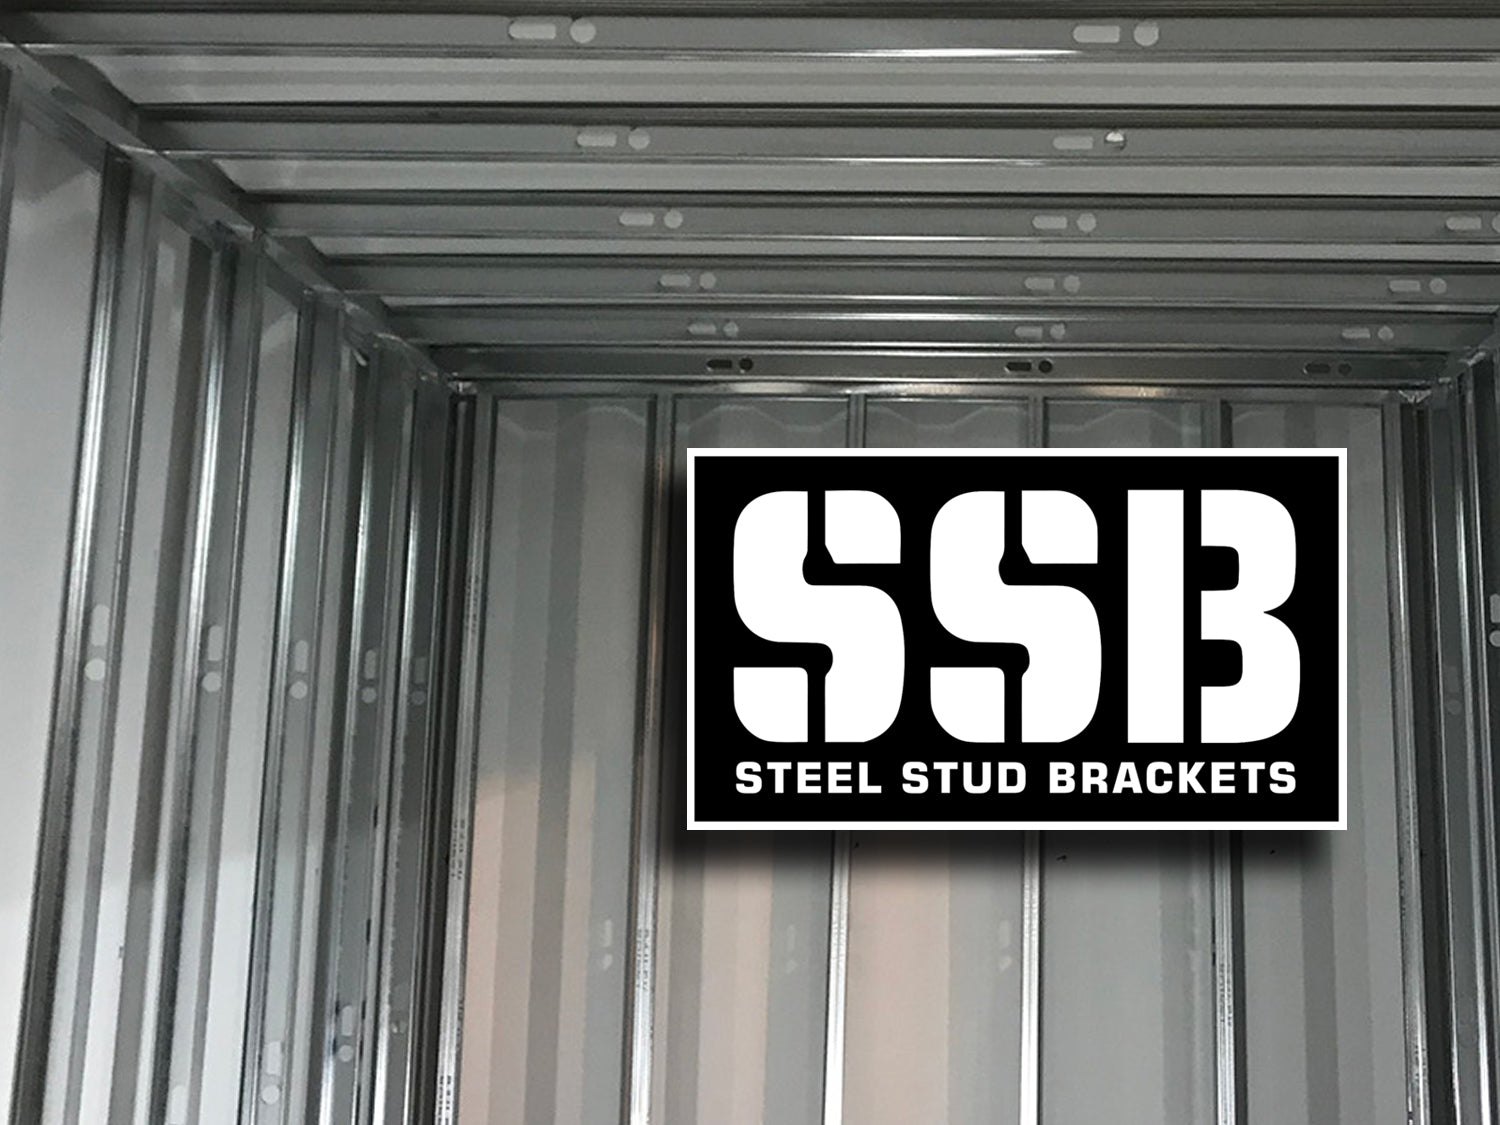 It Is So Easy To Frame the Inside of a Shipping Container with Our Steel Stud Framing Kit.